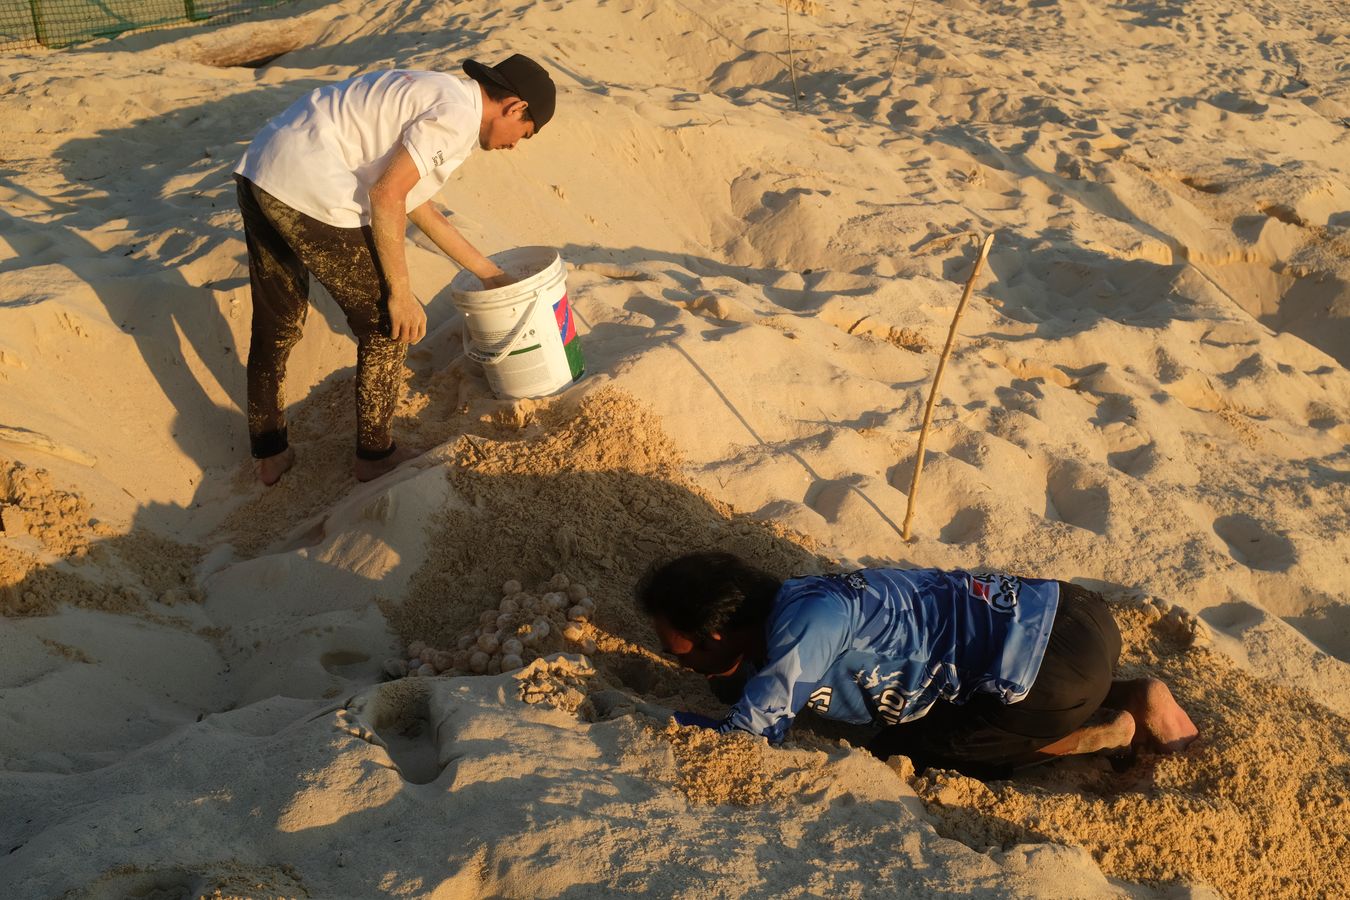 At sunset, rangers remove green turtle eggs from their nests to transfer to the hatchery.